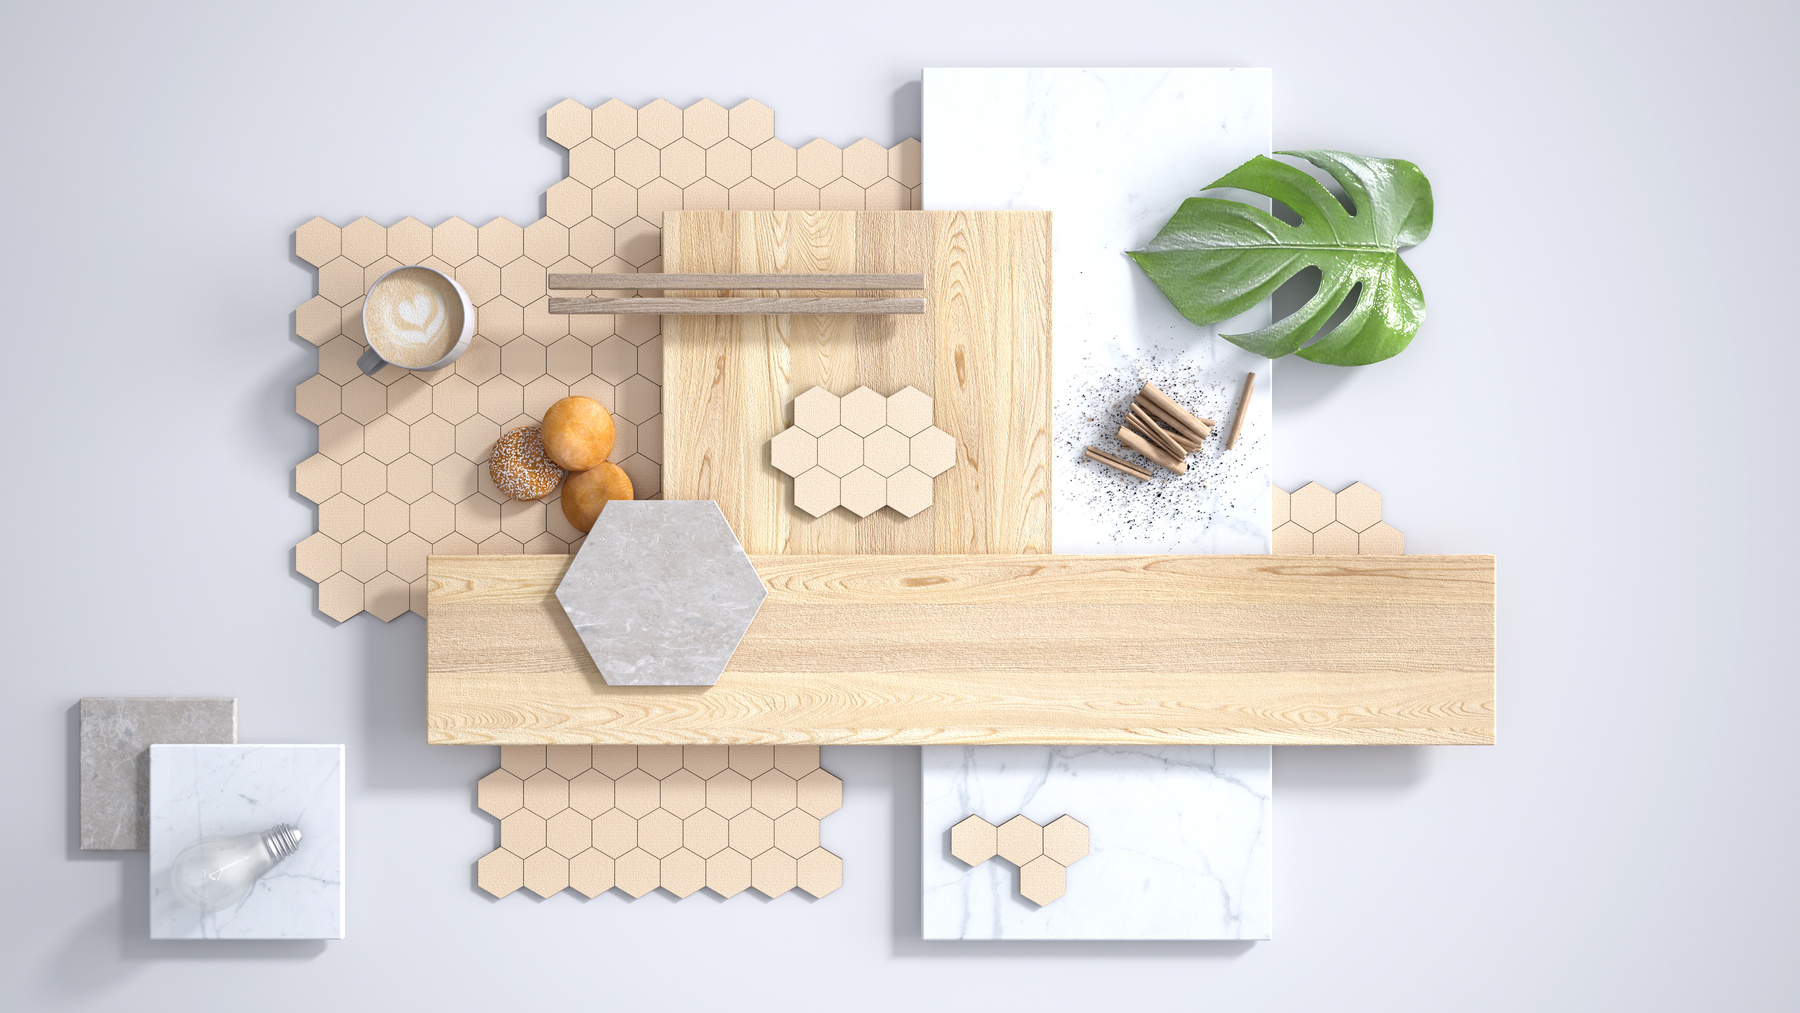 Minimal white background, copy space, marble slab, wooden planks, cutting board, mosaic tiles, plant leaf, cappuccino, cookies, cinnamon. Kitchen interior design concept, mood board